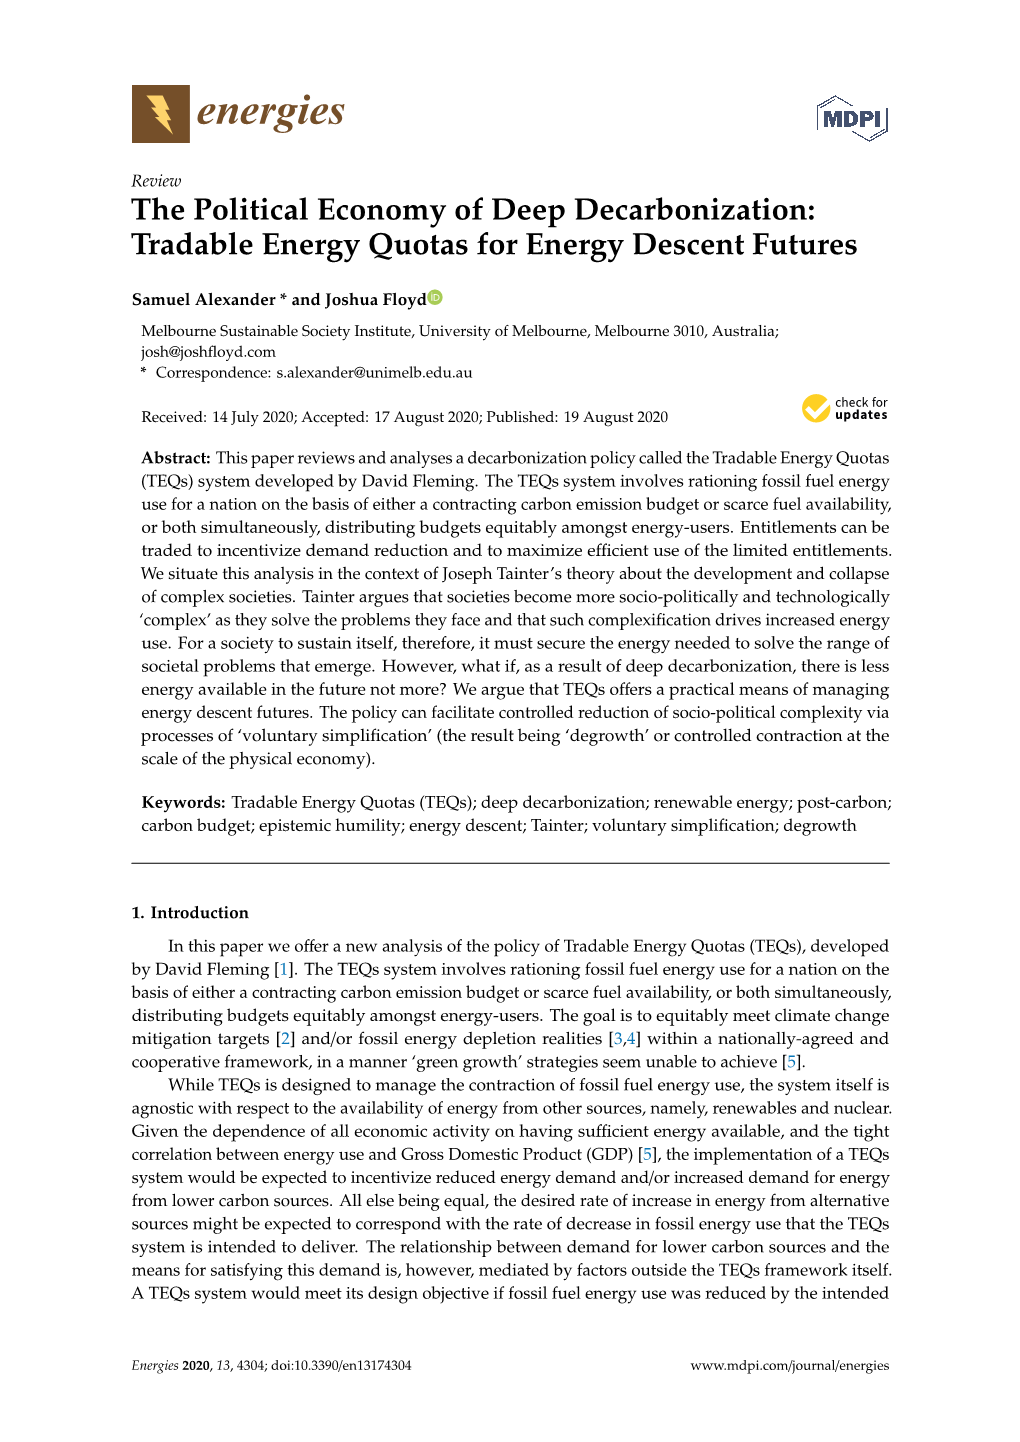 The Political Economy of Deep Decarbonization: Tradable Energy Quotas for Energy Descent Futures